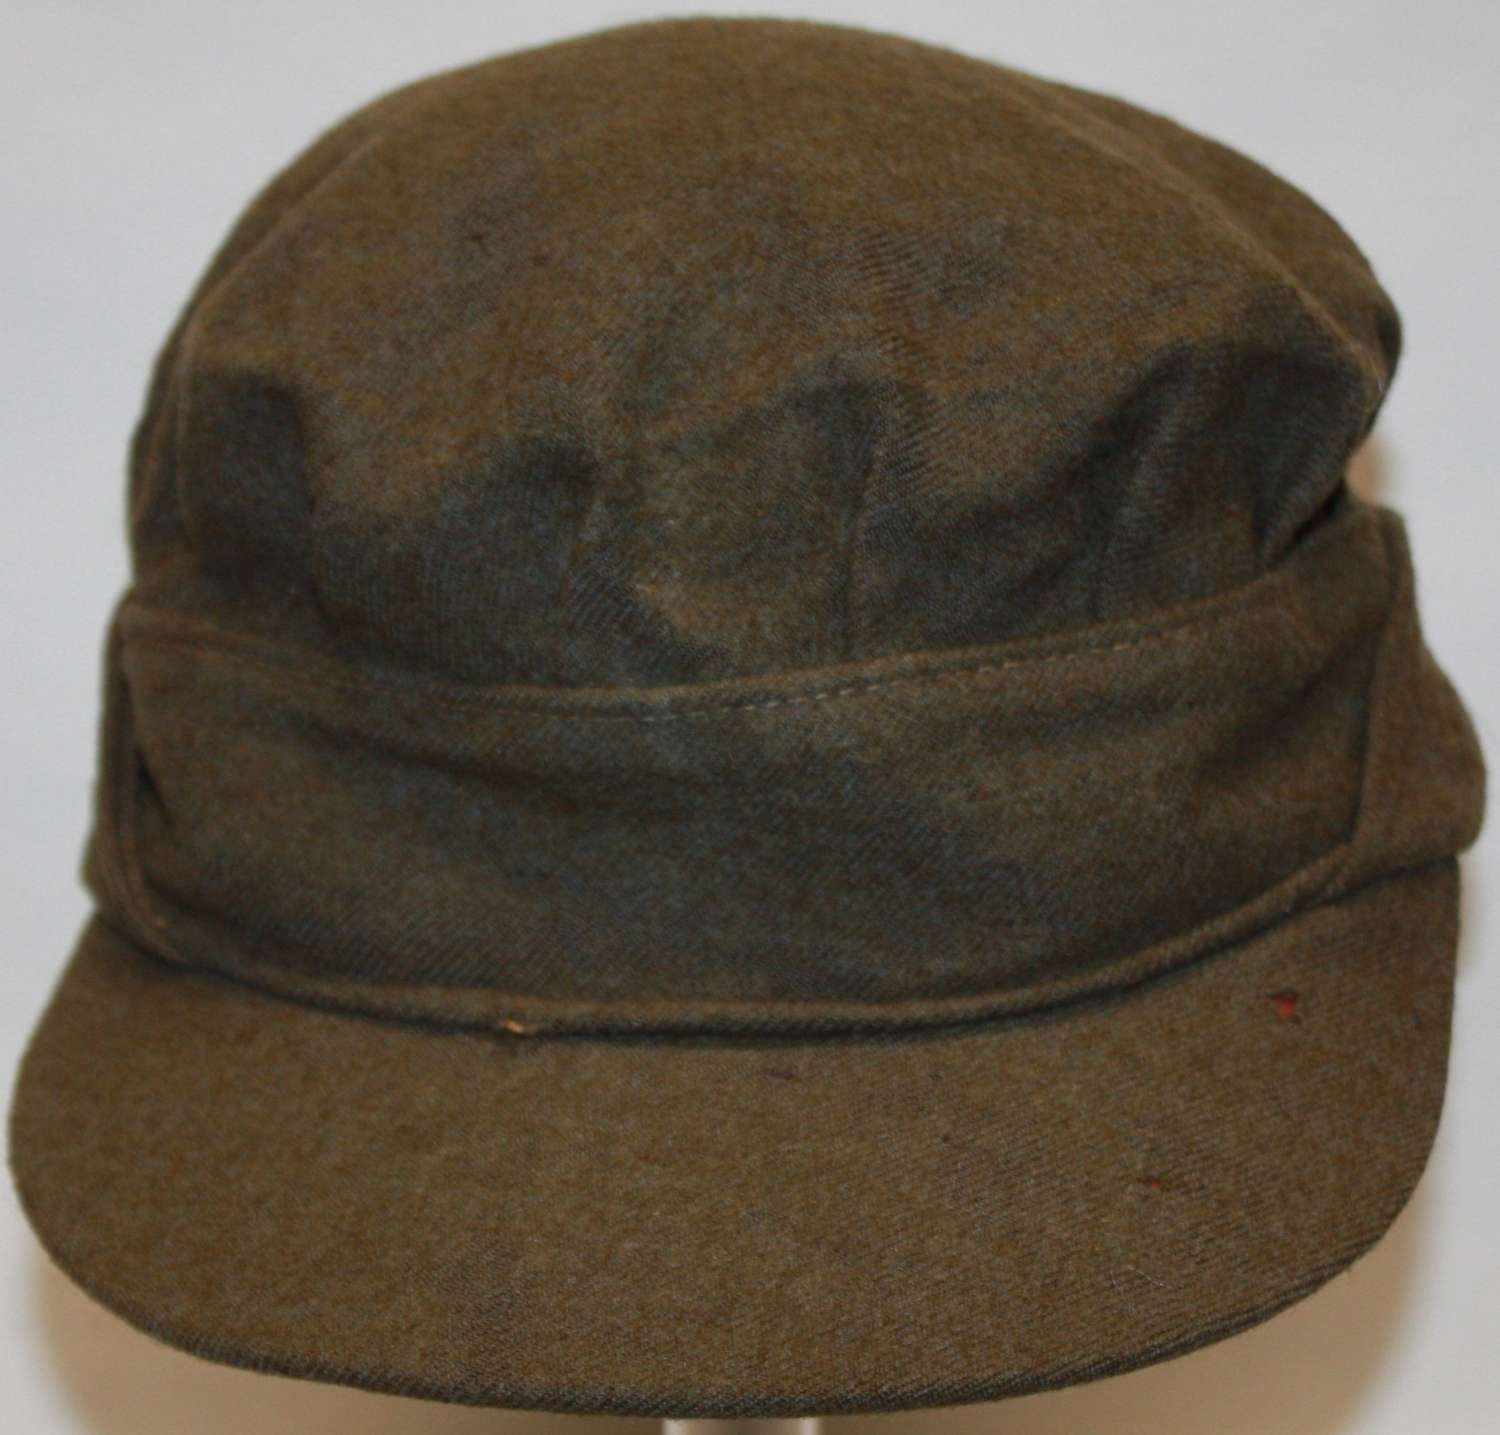 A GOOD USED WWII ATS OTHER RANKS PEAKED CAP